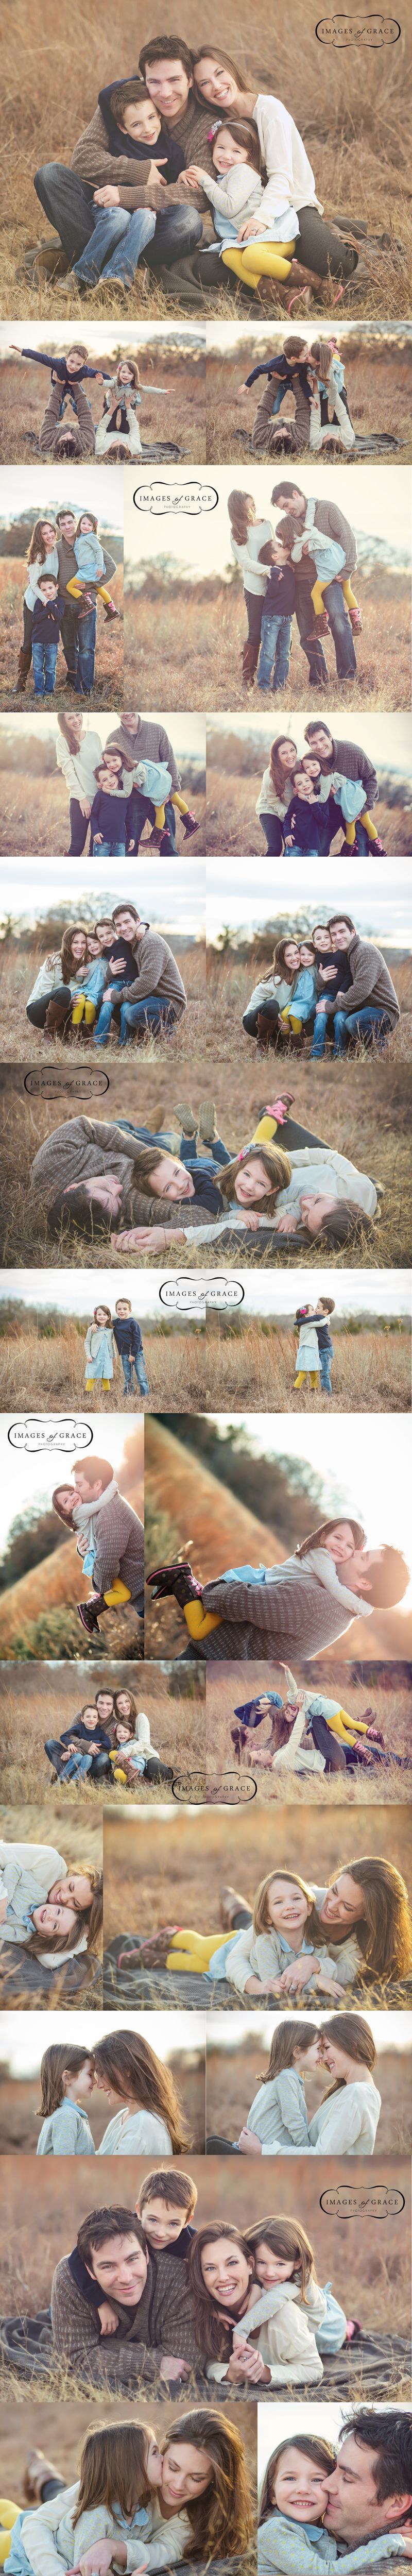 This is a wonderful example of great family styling for a photo shoot. Except for the yellow stockings of the little girl just to